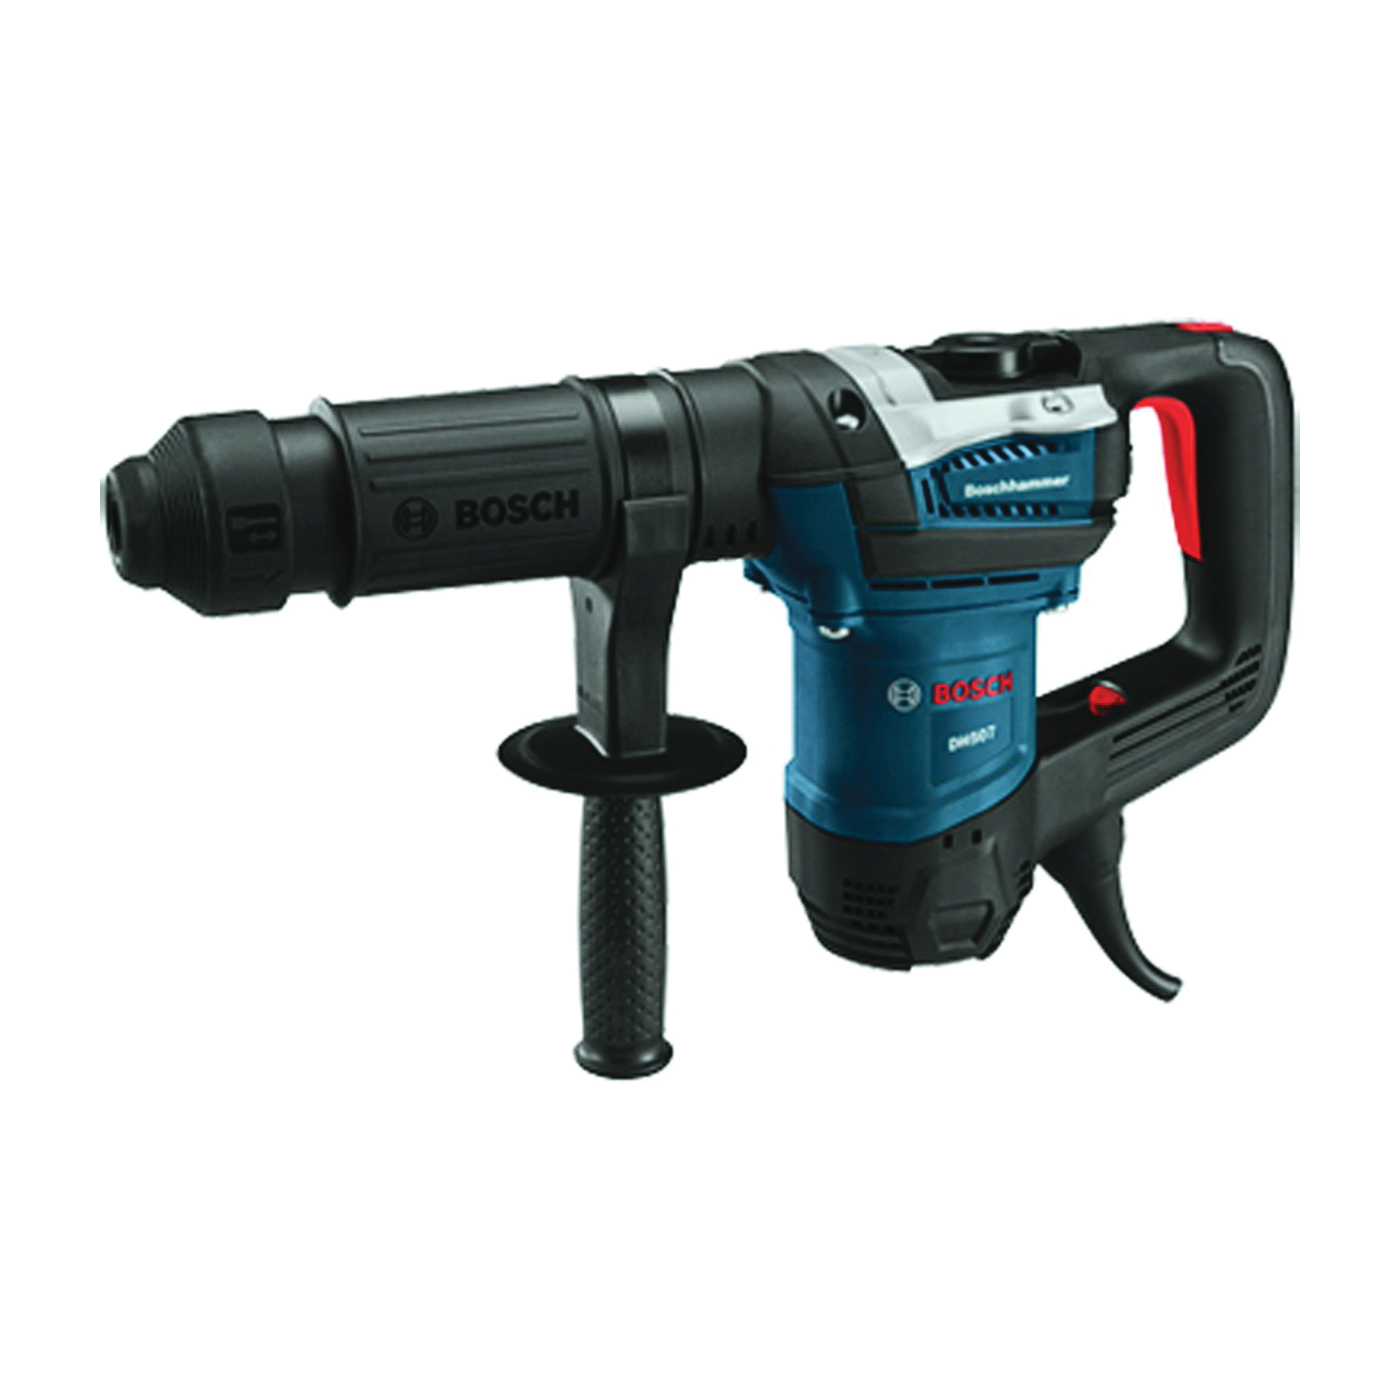 DH507 Demolition Hammer, 10 A, 1 in Chuck, Keyless, SDS-Max Chuck, 1350 to 2800 bpm, 8 ft L Cord